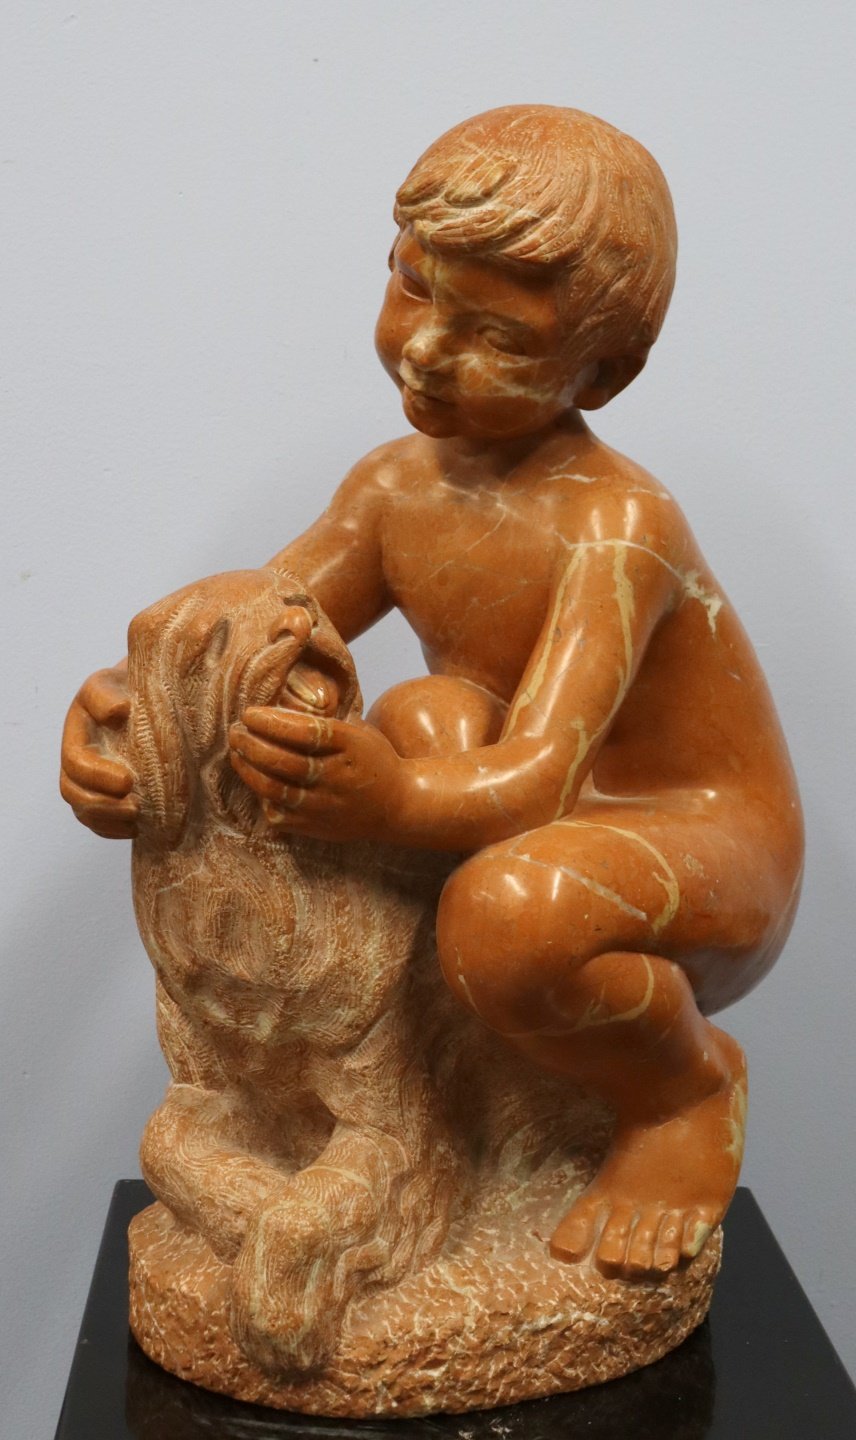 UNSIGNED MARBLE SCULPTURE OF BOY 3b8836